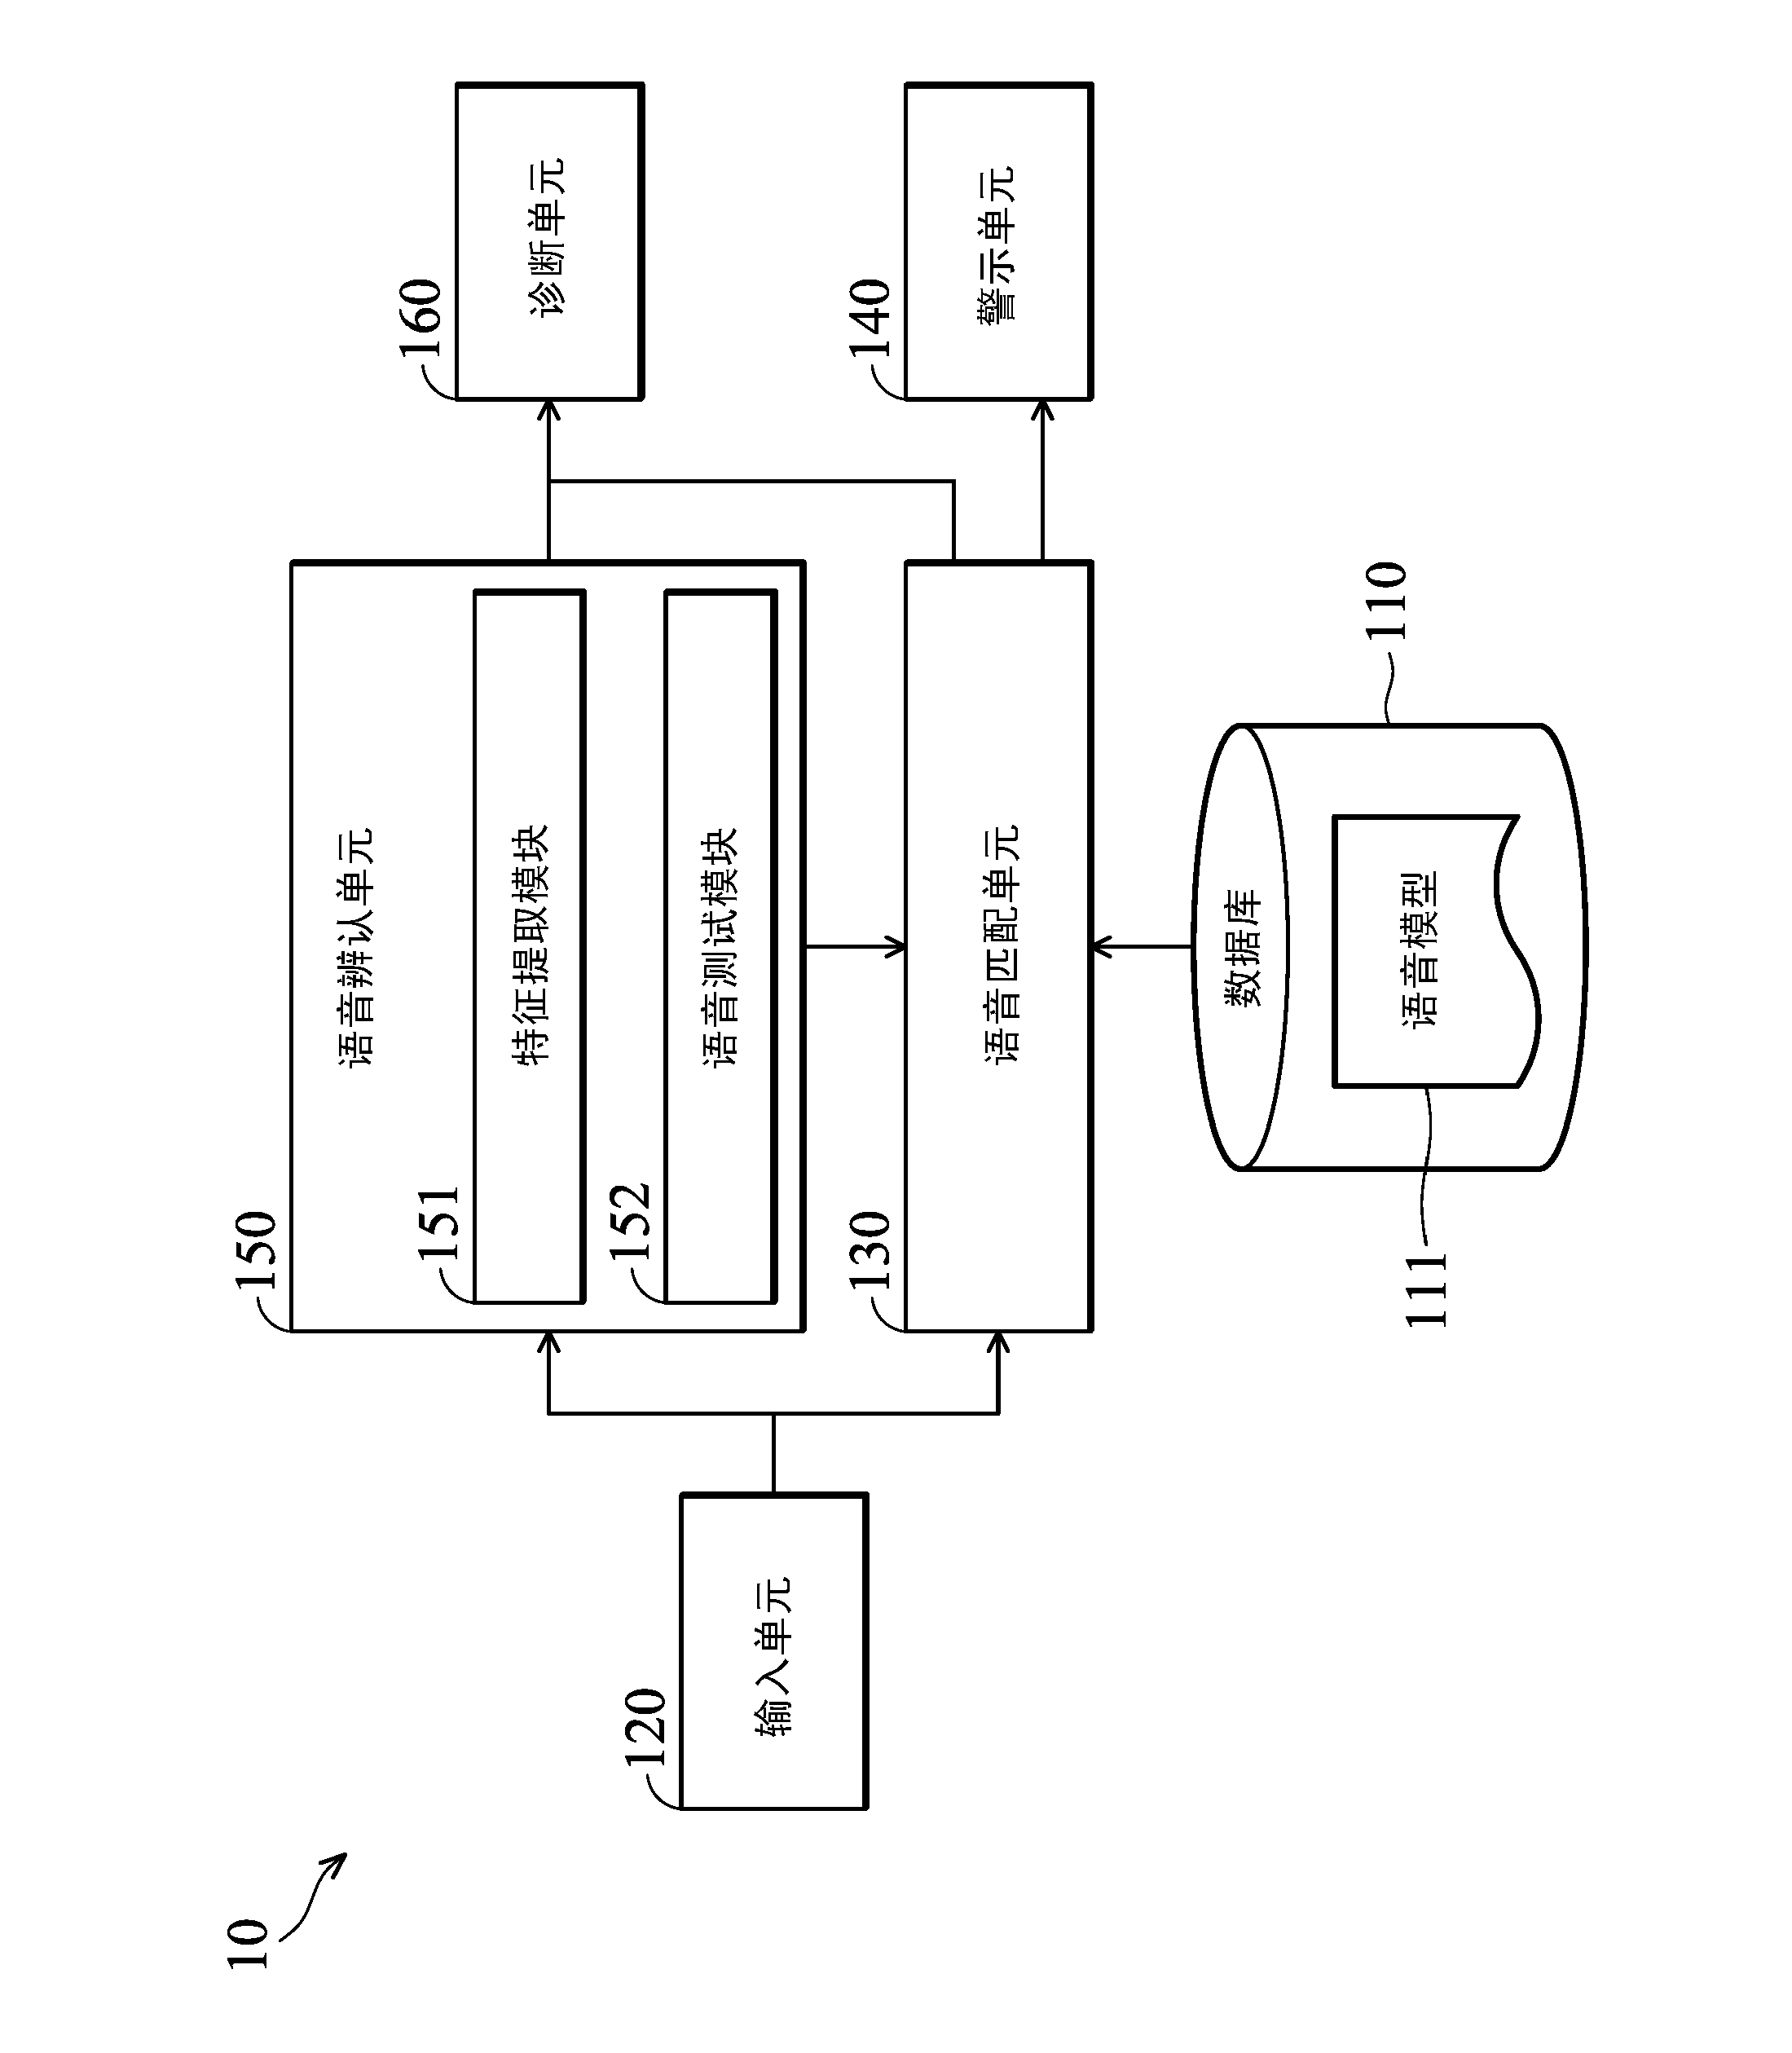 Apparatus and method for voice assisted medical diagnosis